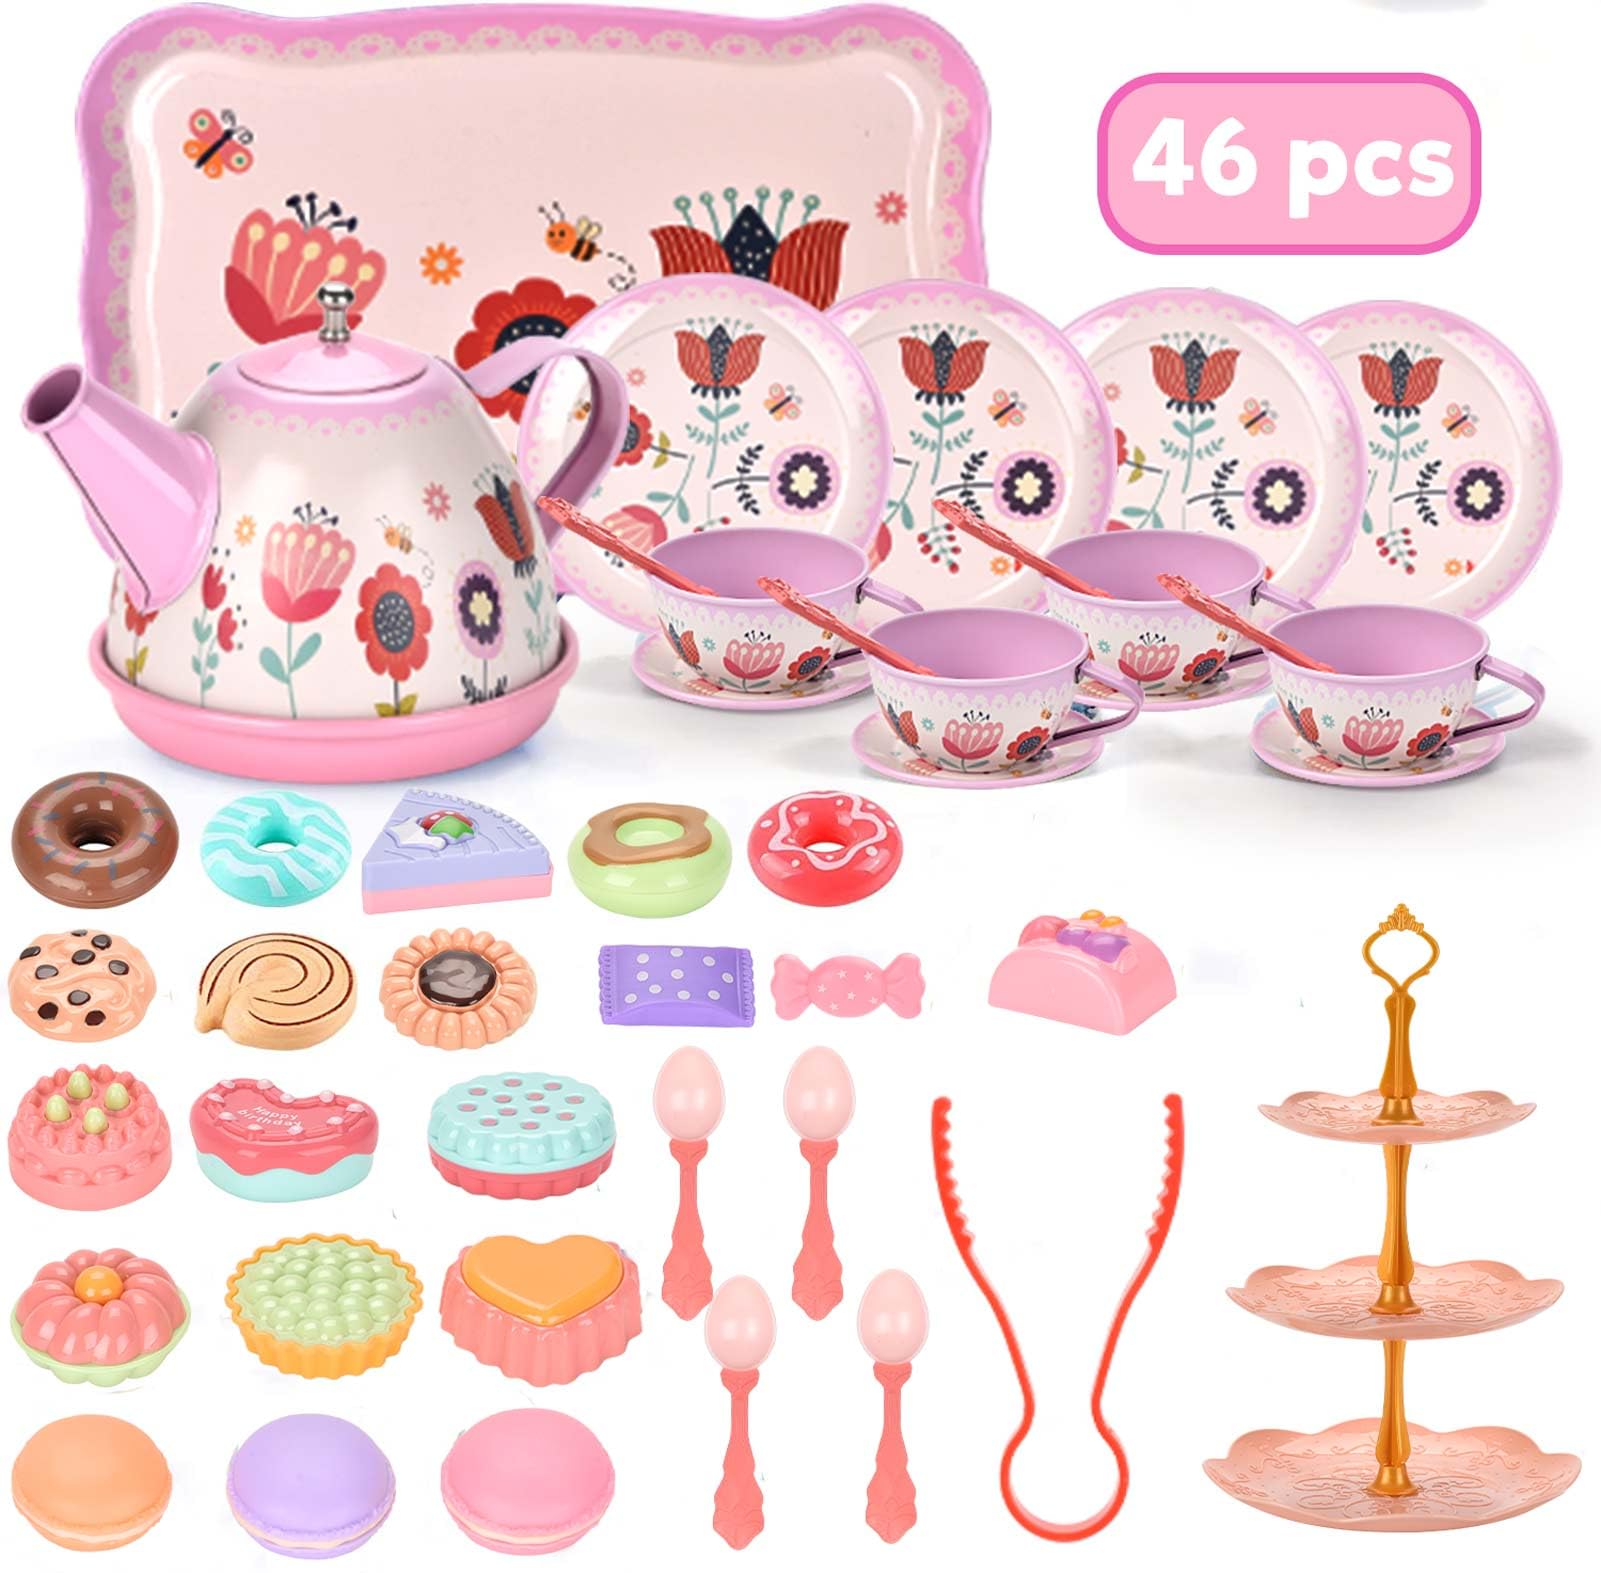 Lajeje Tea Set for Little Girls, Birthday Gift for Age 3 4 5 6 Year Old, Toddler Toys Tea Party Set for Little Girls, Princess Kids Kitchen Pretend Toy with Tin Tea Set, Desserts & Carrying Case